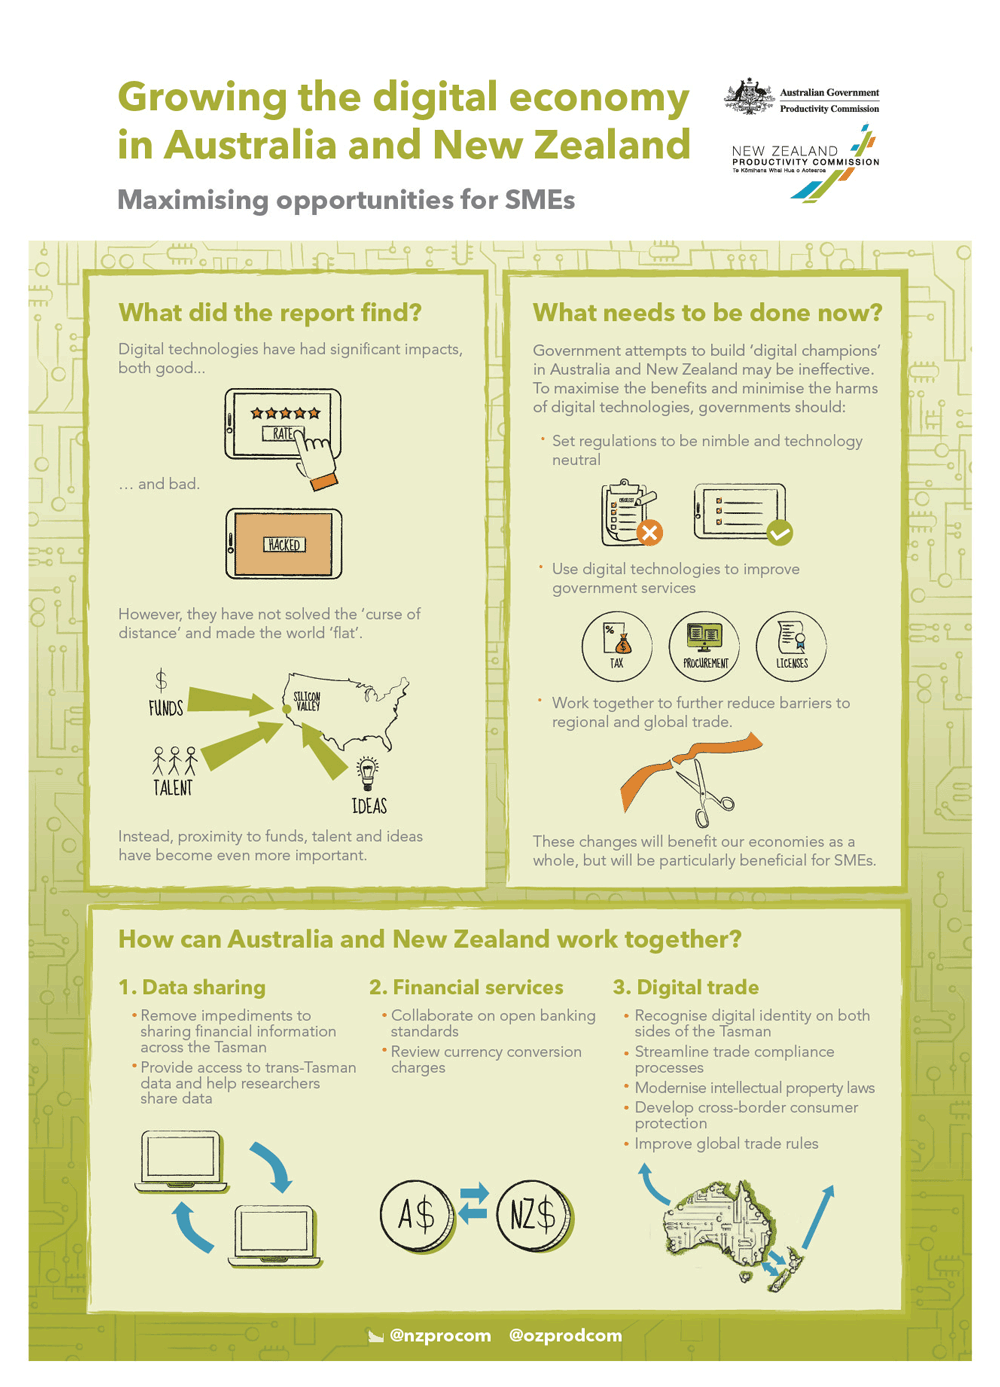 Growing the Digital Economy in Australia and New Zealand infographic. Text version follows.